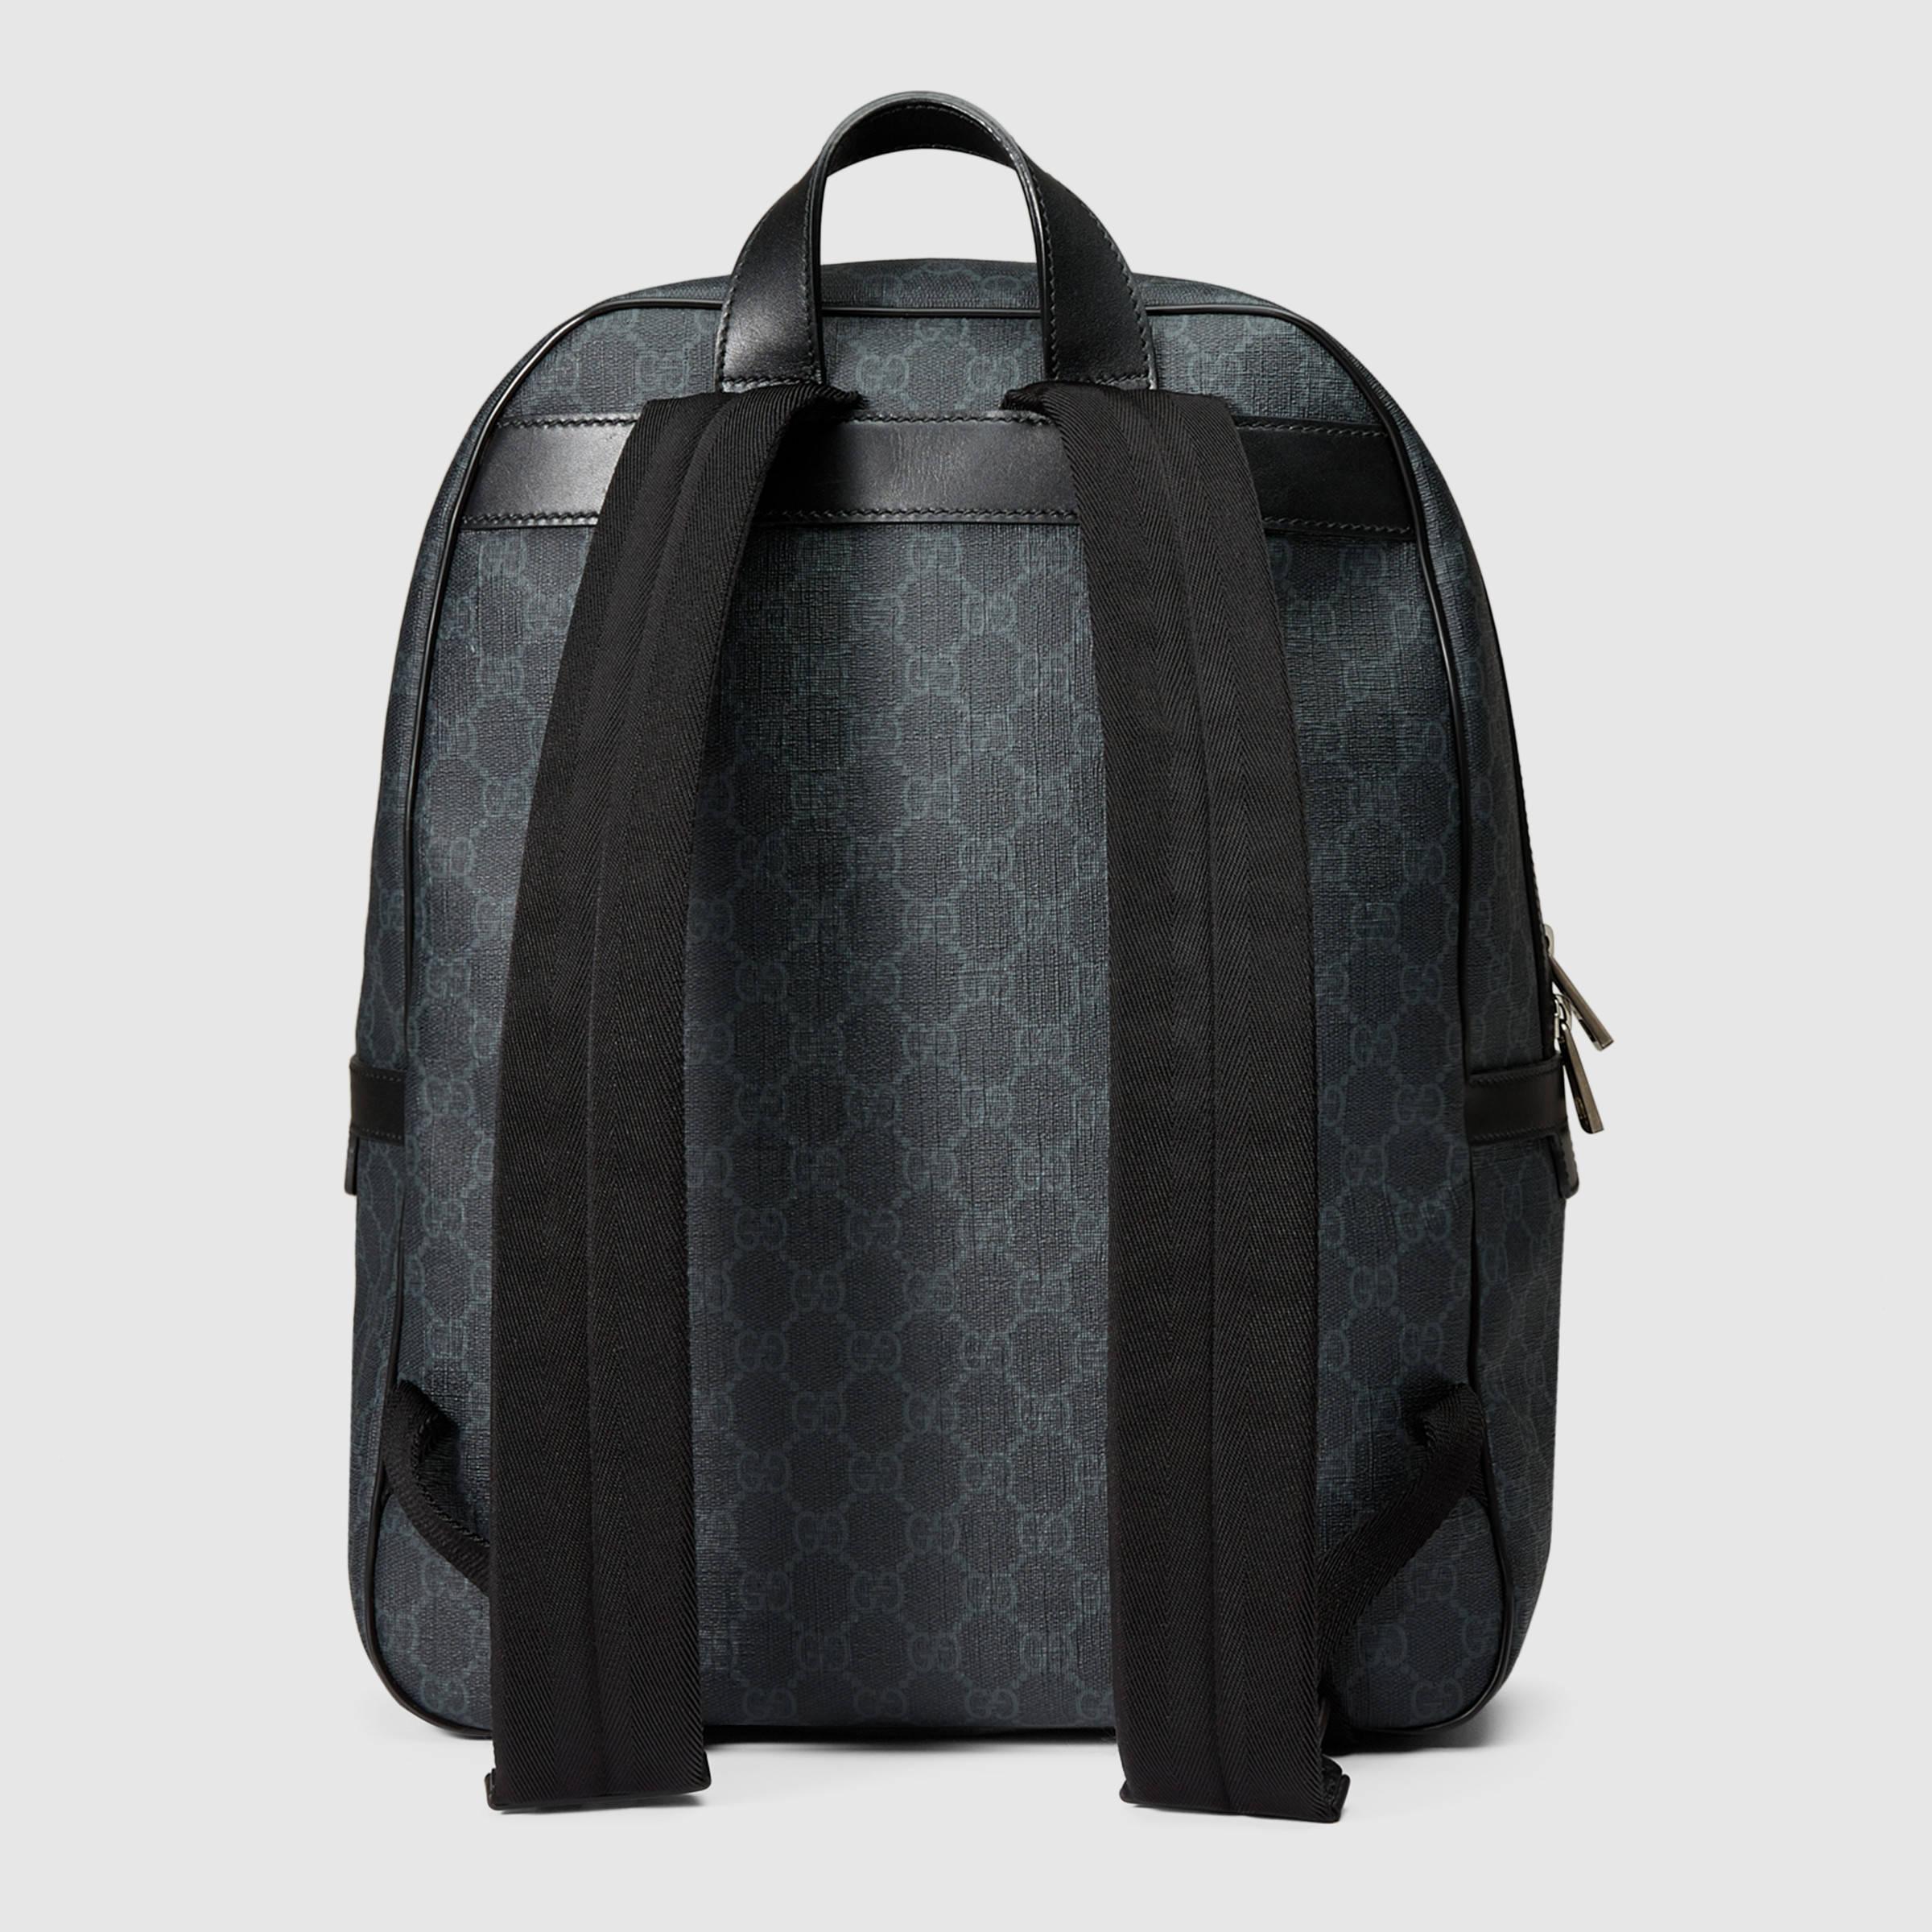 Gucci Gg Supreme Canvas Backpack in Black for Men - Lyst